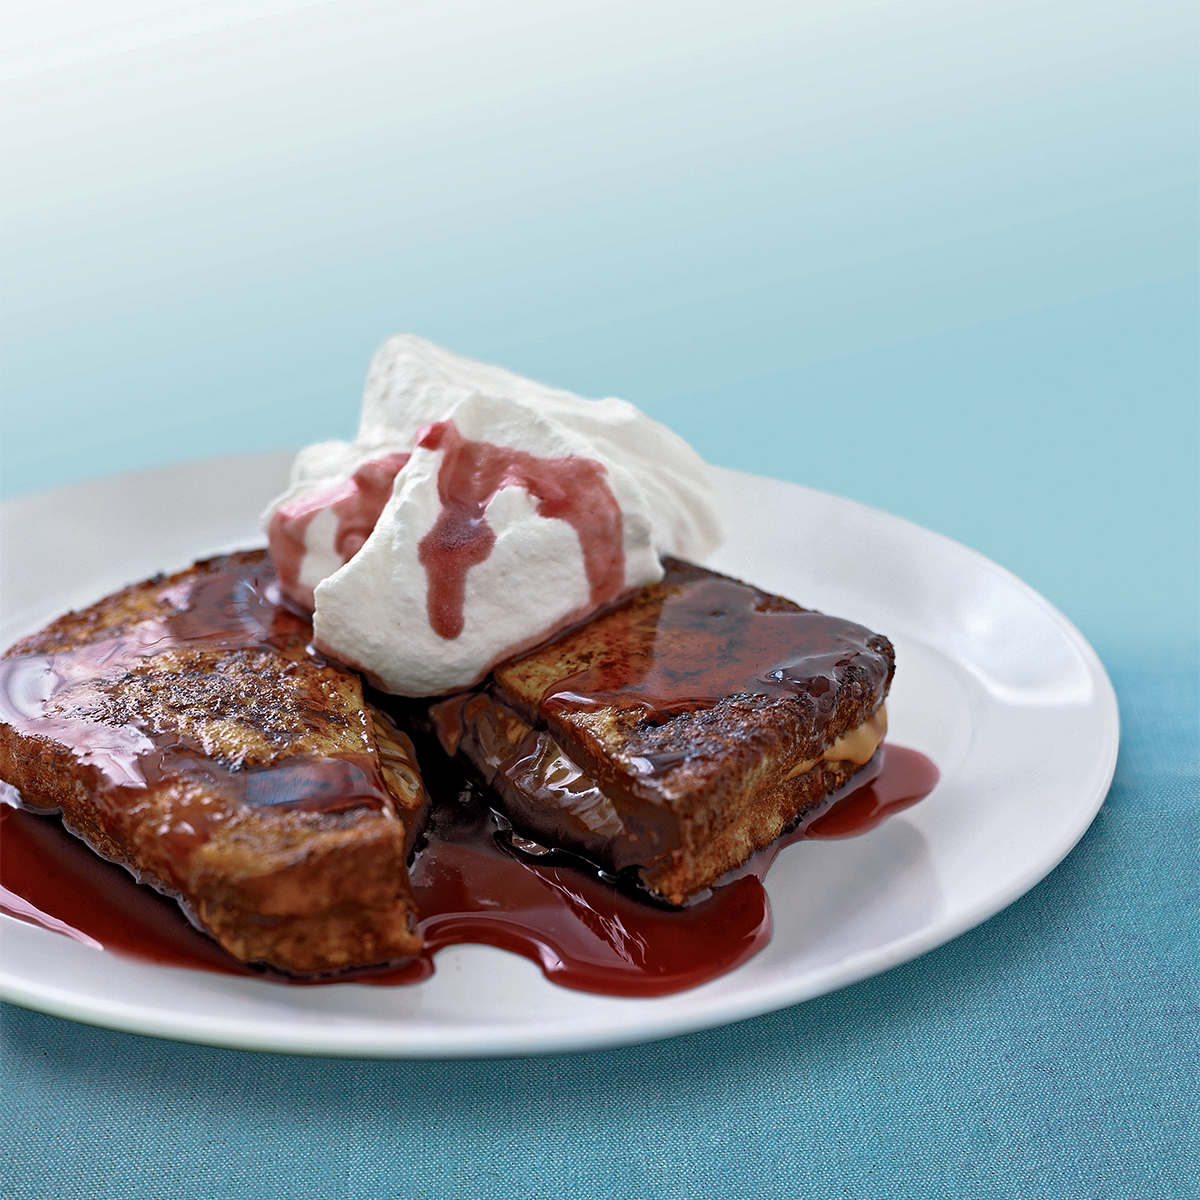 Peanut Butter-Chocolate Stuffed French Toast with Jam Syrup 